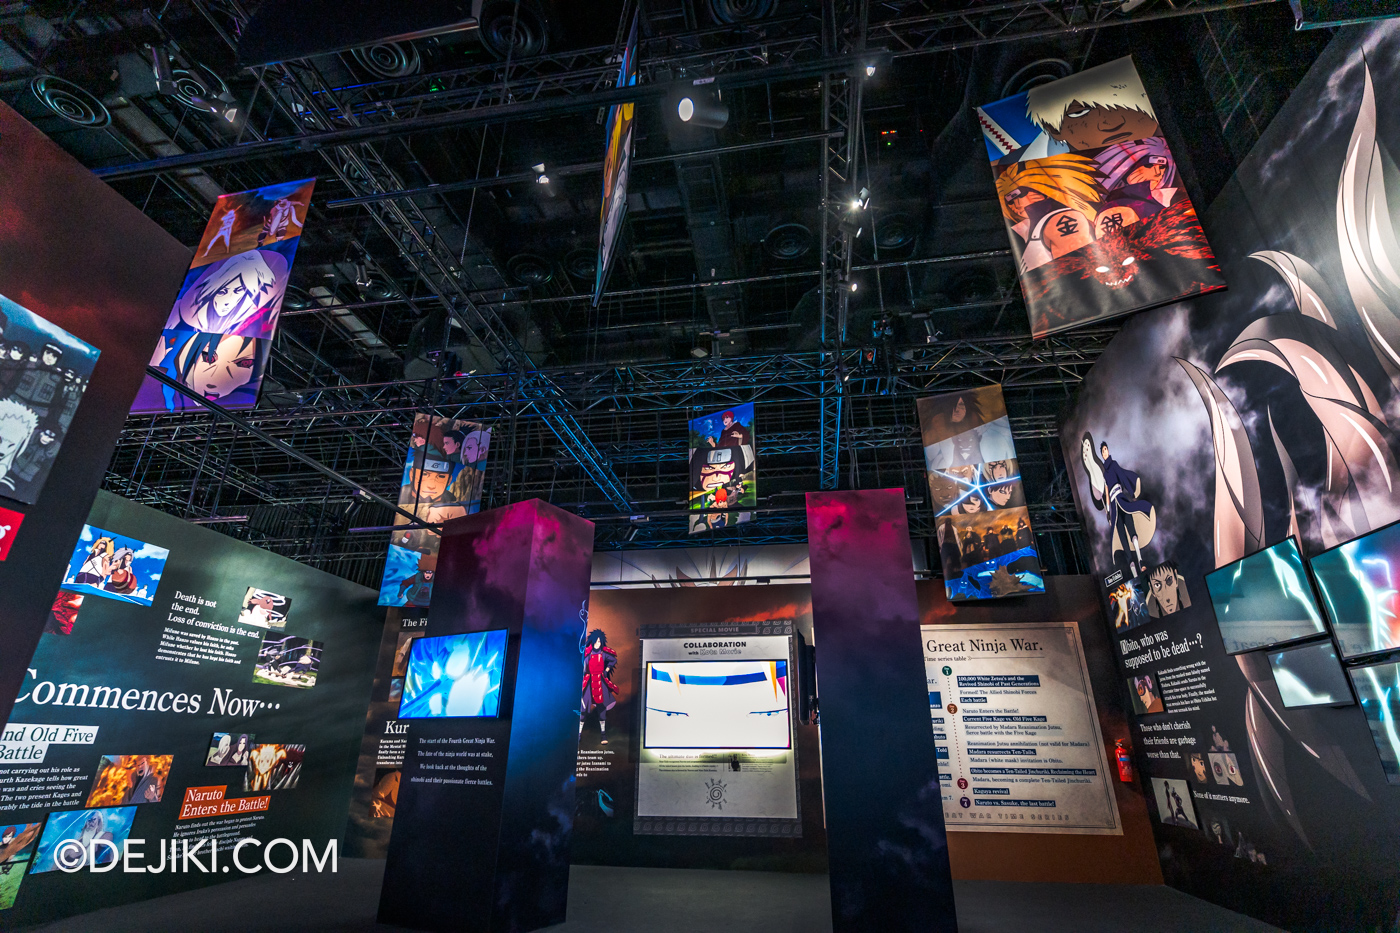 Naruto The Gallery at Universal Studios Singapore Exhibition 7 Fourth Great Ninja War banners overhead